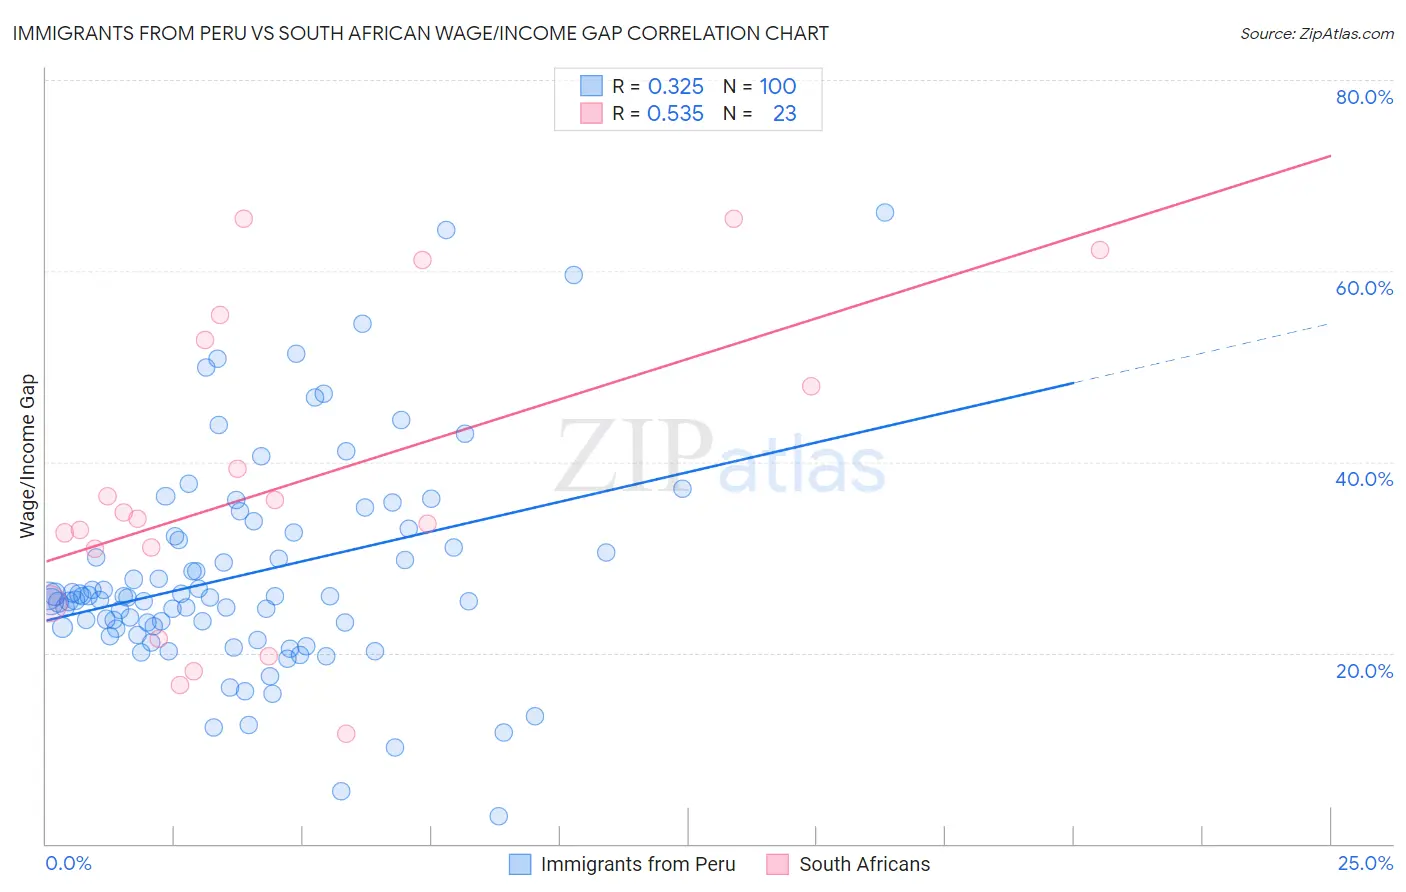 Immigrants from Peru vs South African Wage/Income Gap